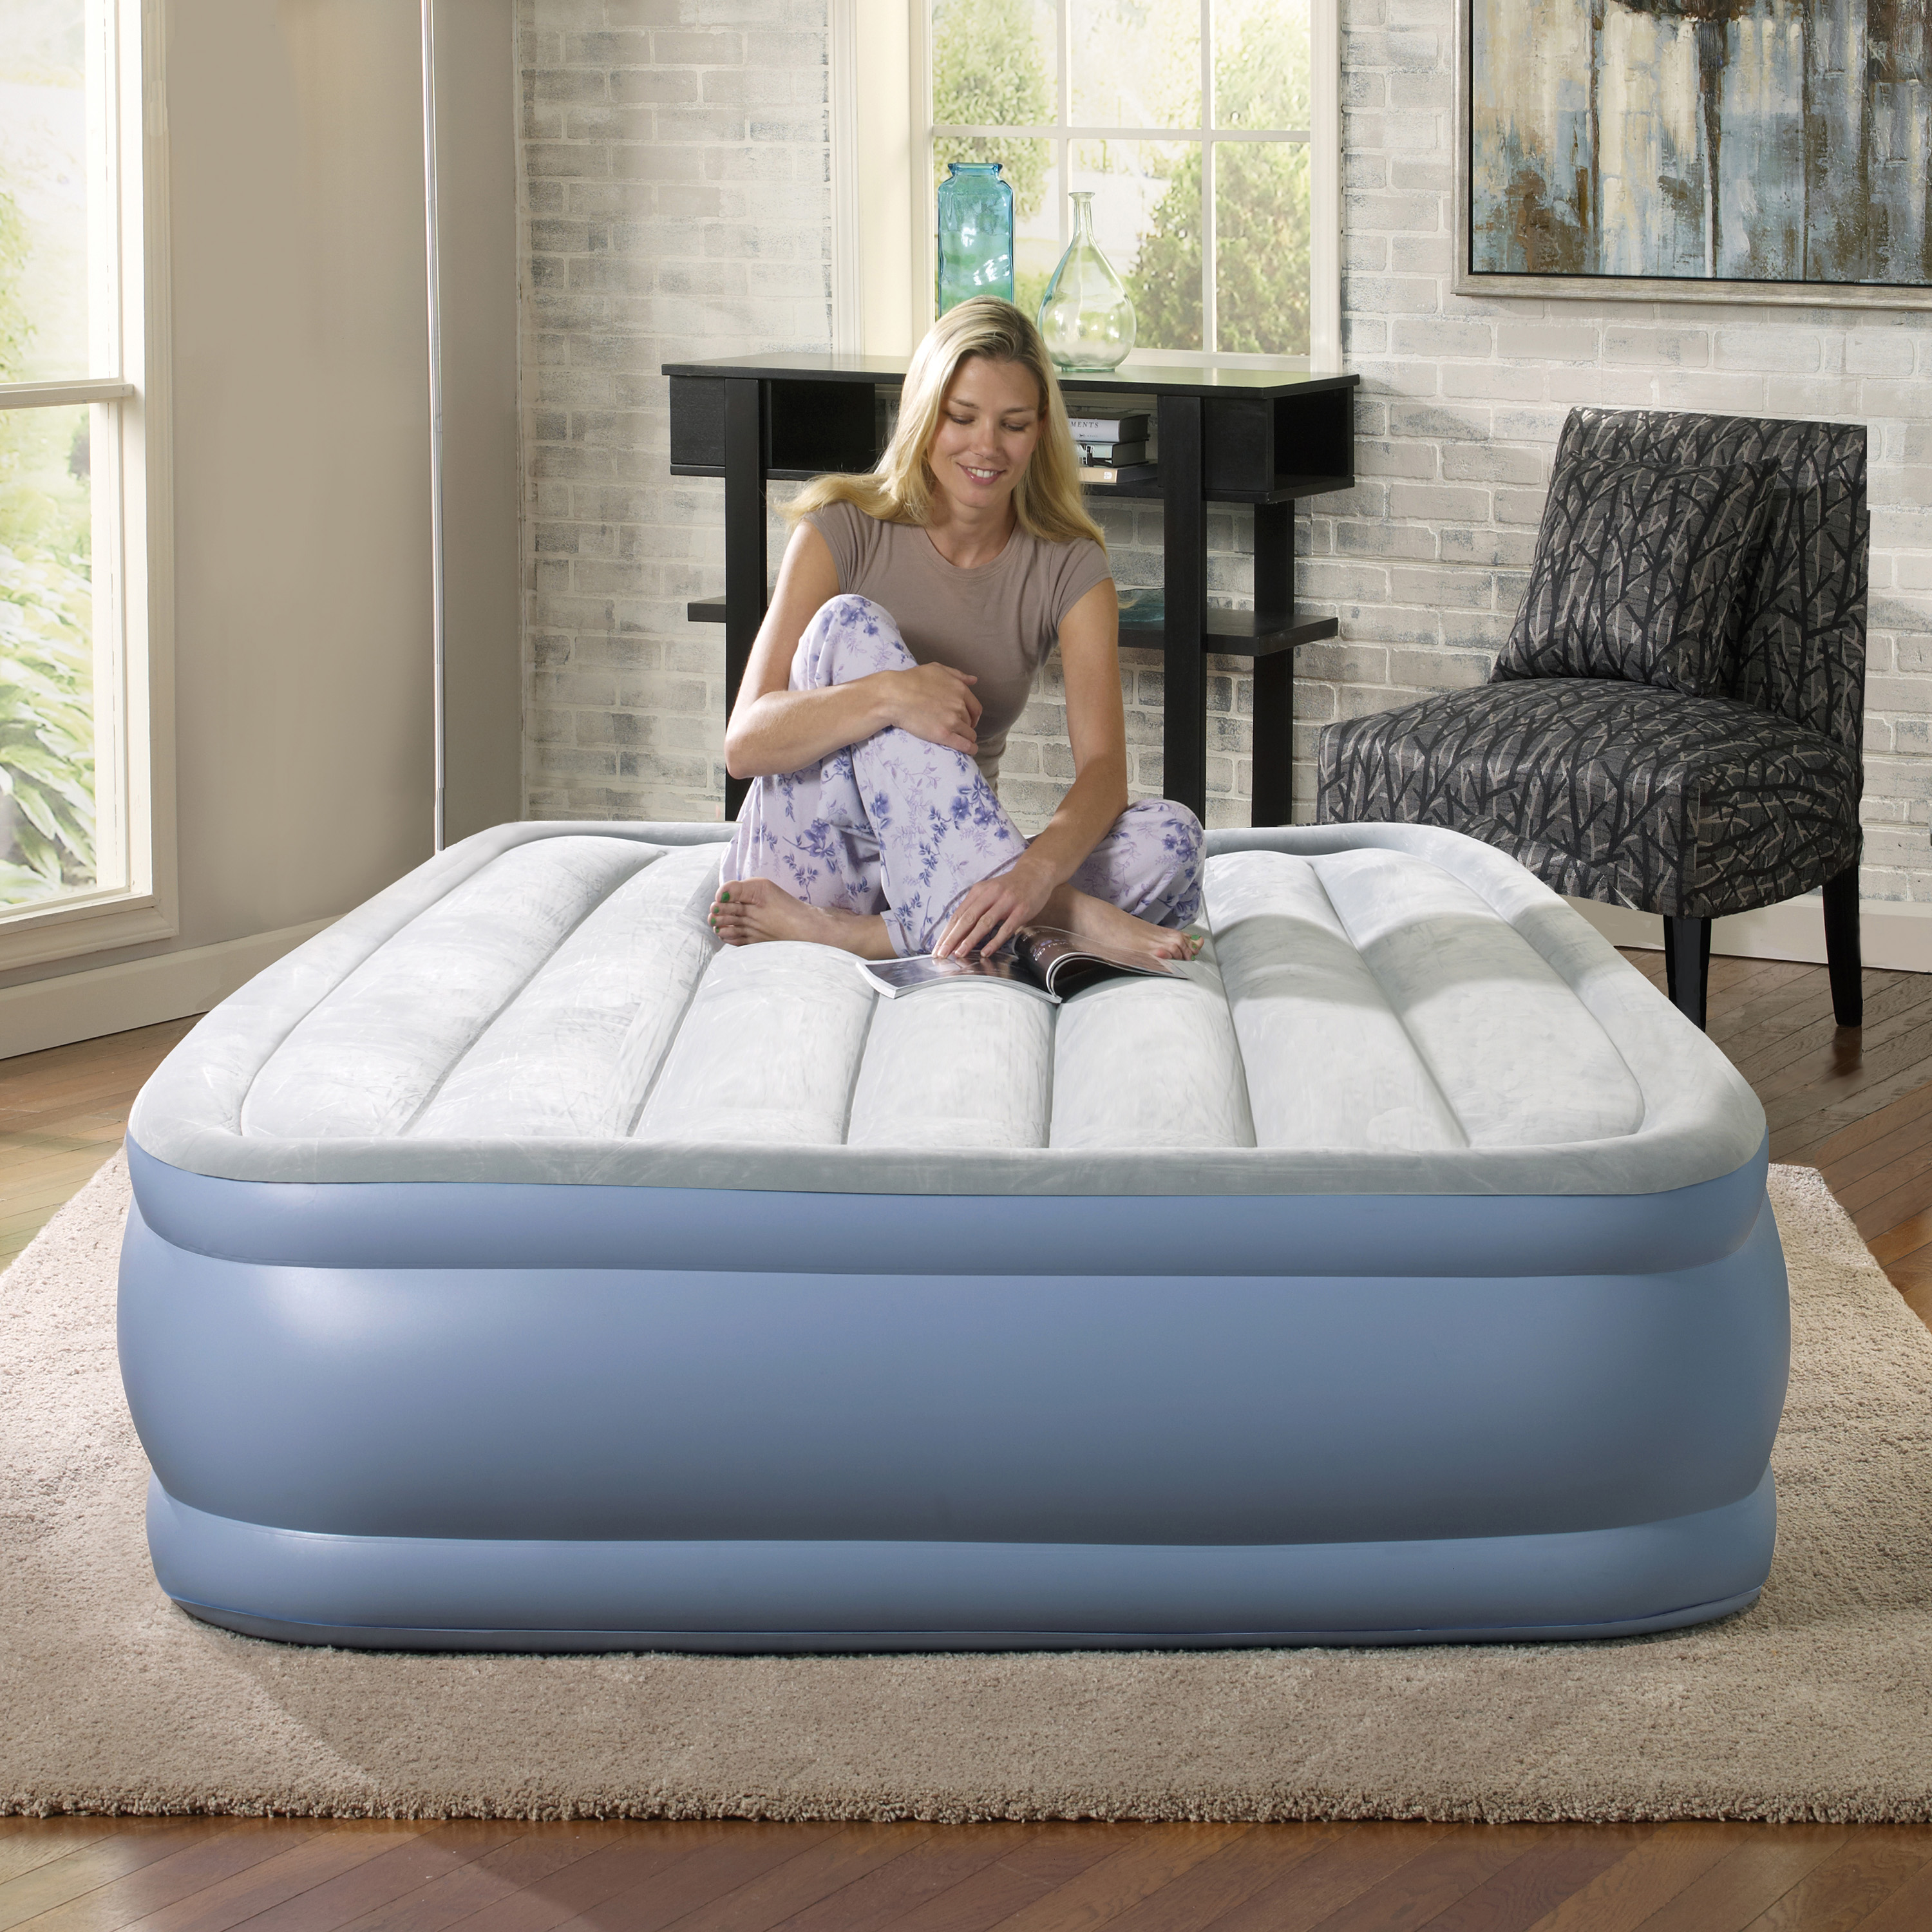 Beautyrest Hi Loft 16" Full Air Bed Mattress, Raised Inflatable Blow-Up Bed, Powerful Pump, Adjustable Firmness - image 4 of 12